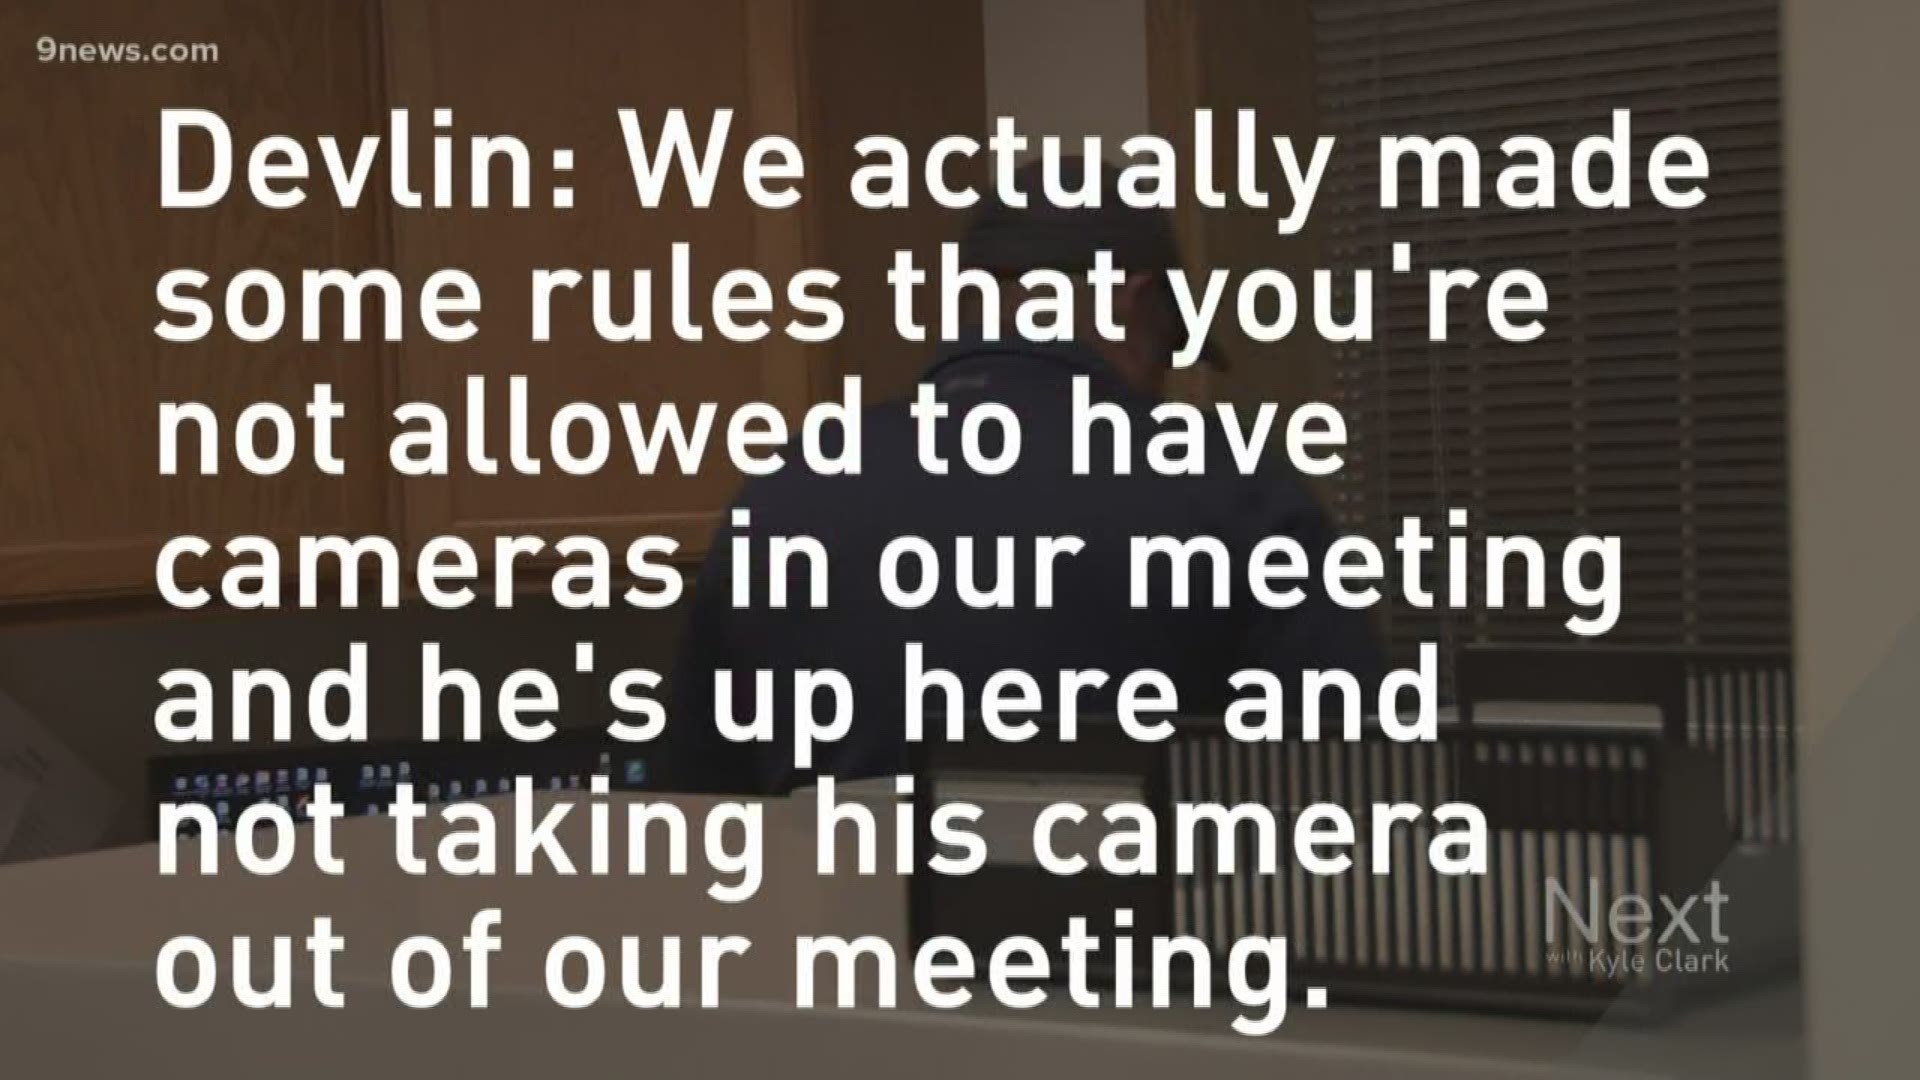 Minutes after passing that rule, they called the police on the man recording the meeting.